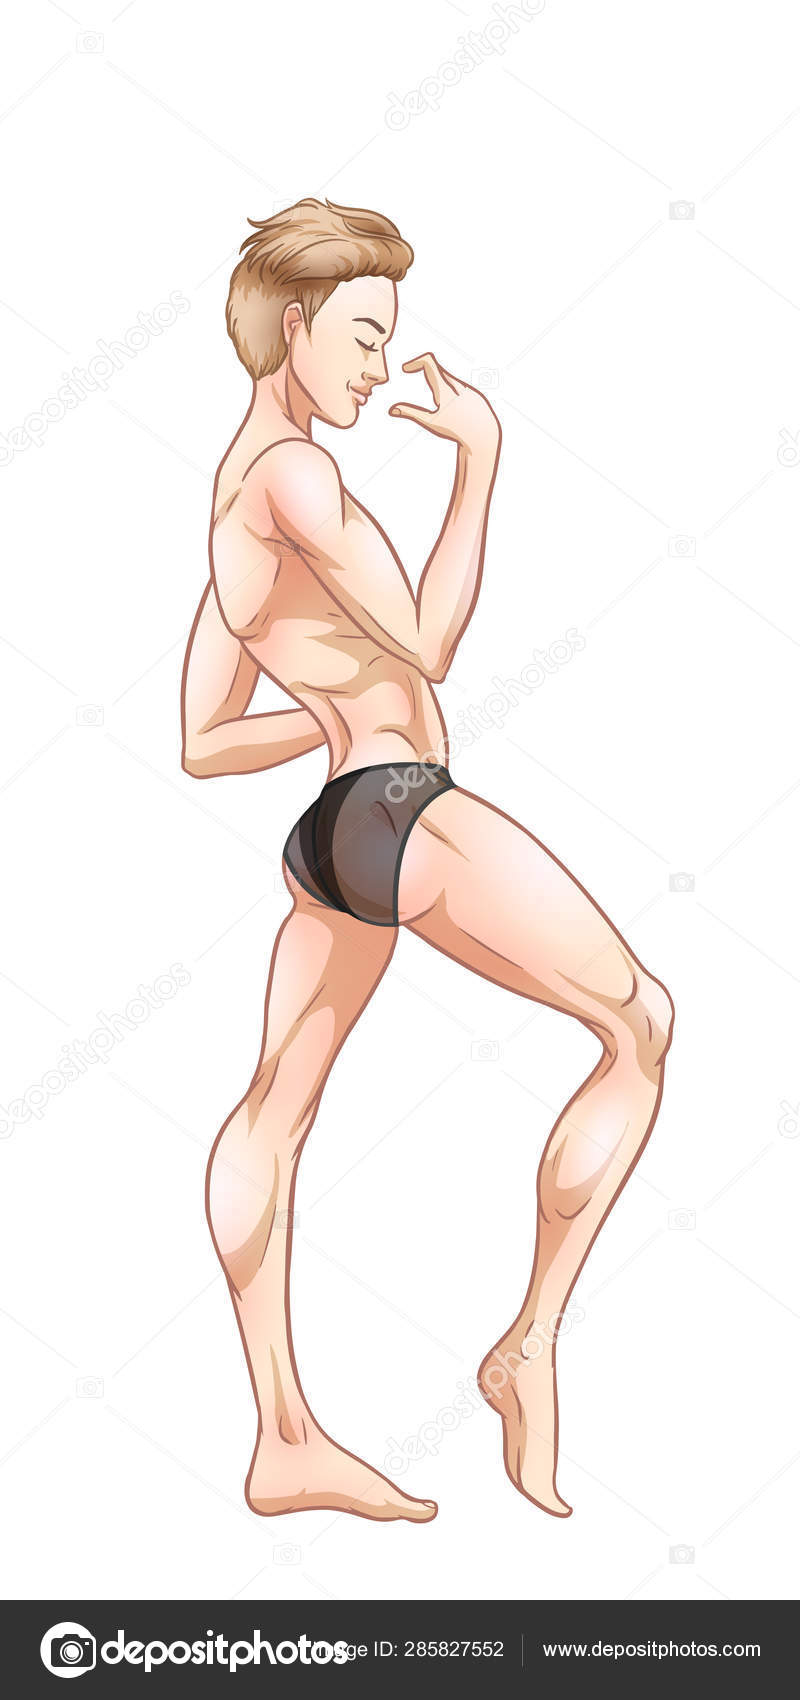 Sexy Underwear Vector Art PNG, Sexy Handsome Man Dancing In Underwear, Gay,  Color, In PNG Image For Free Download